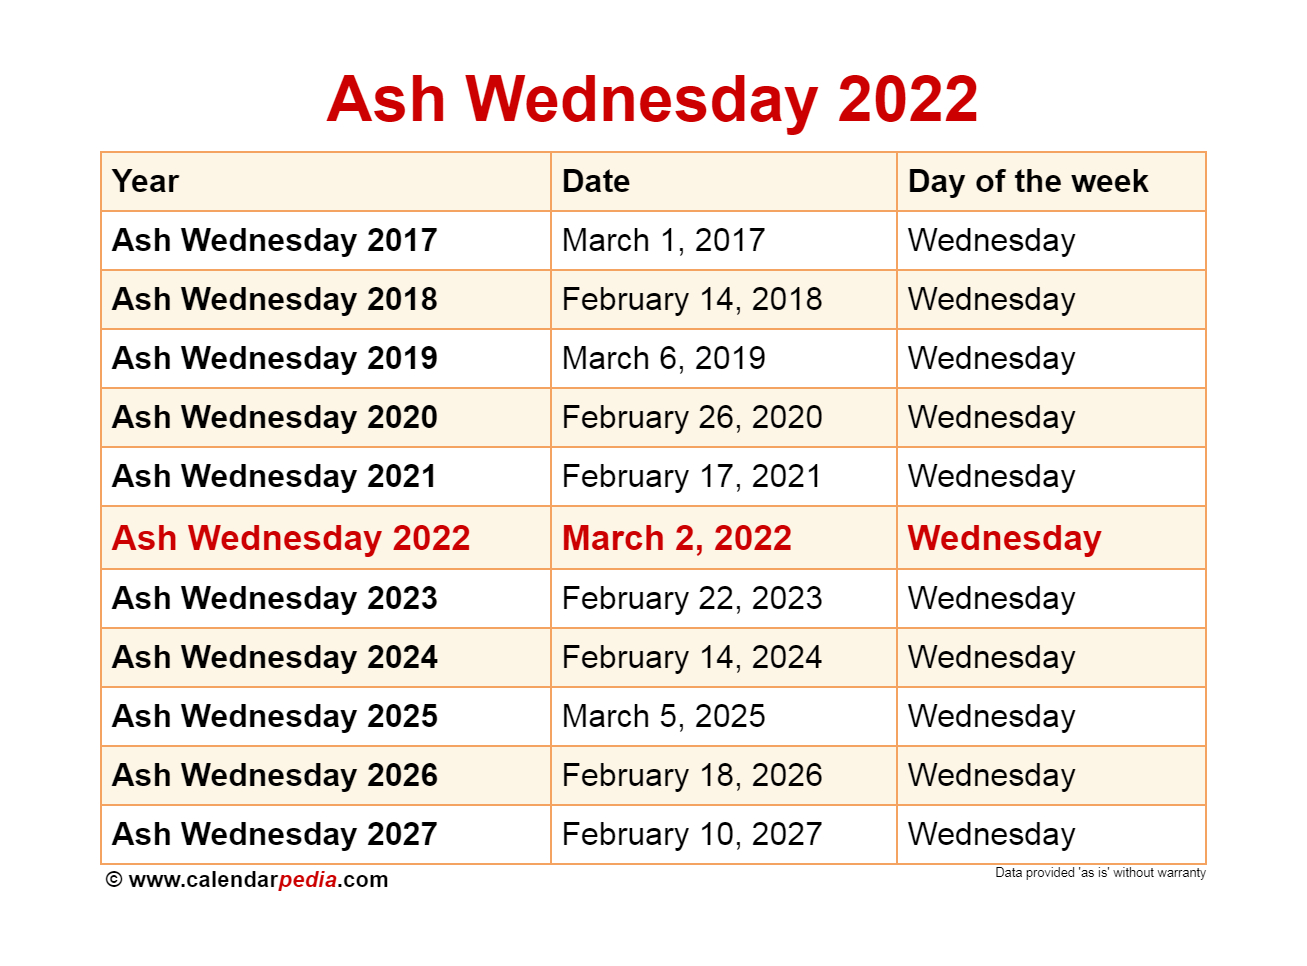 when is ash wednesday 2022